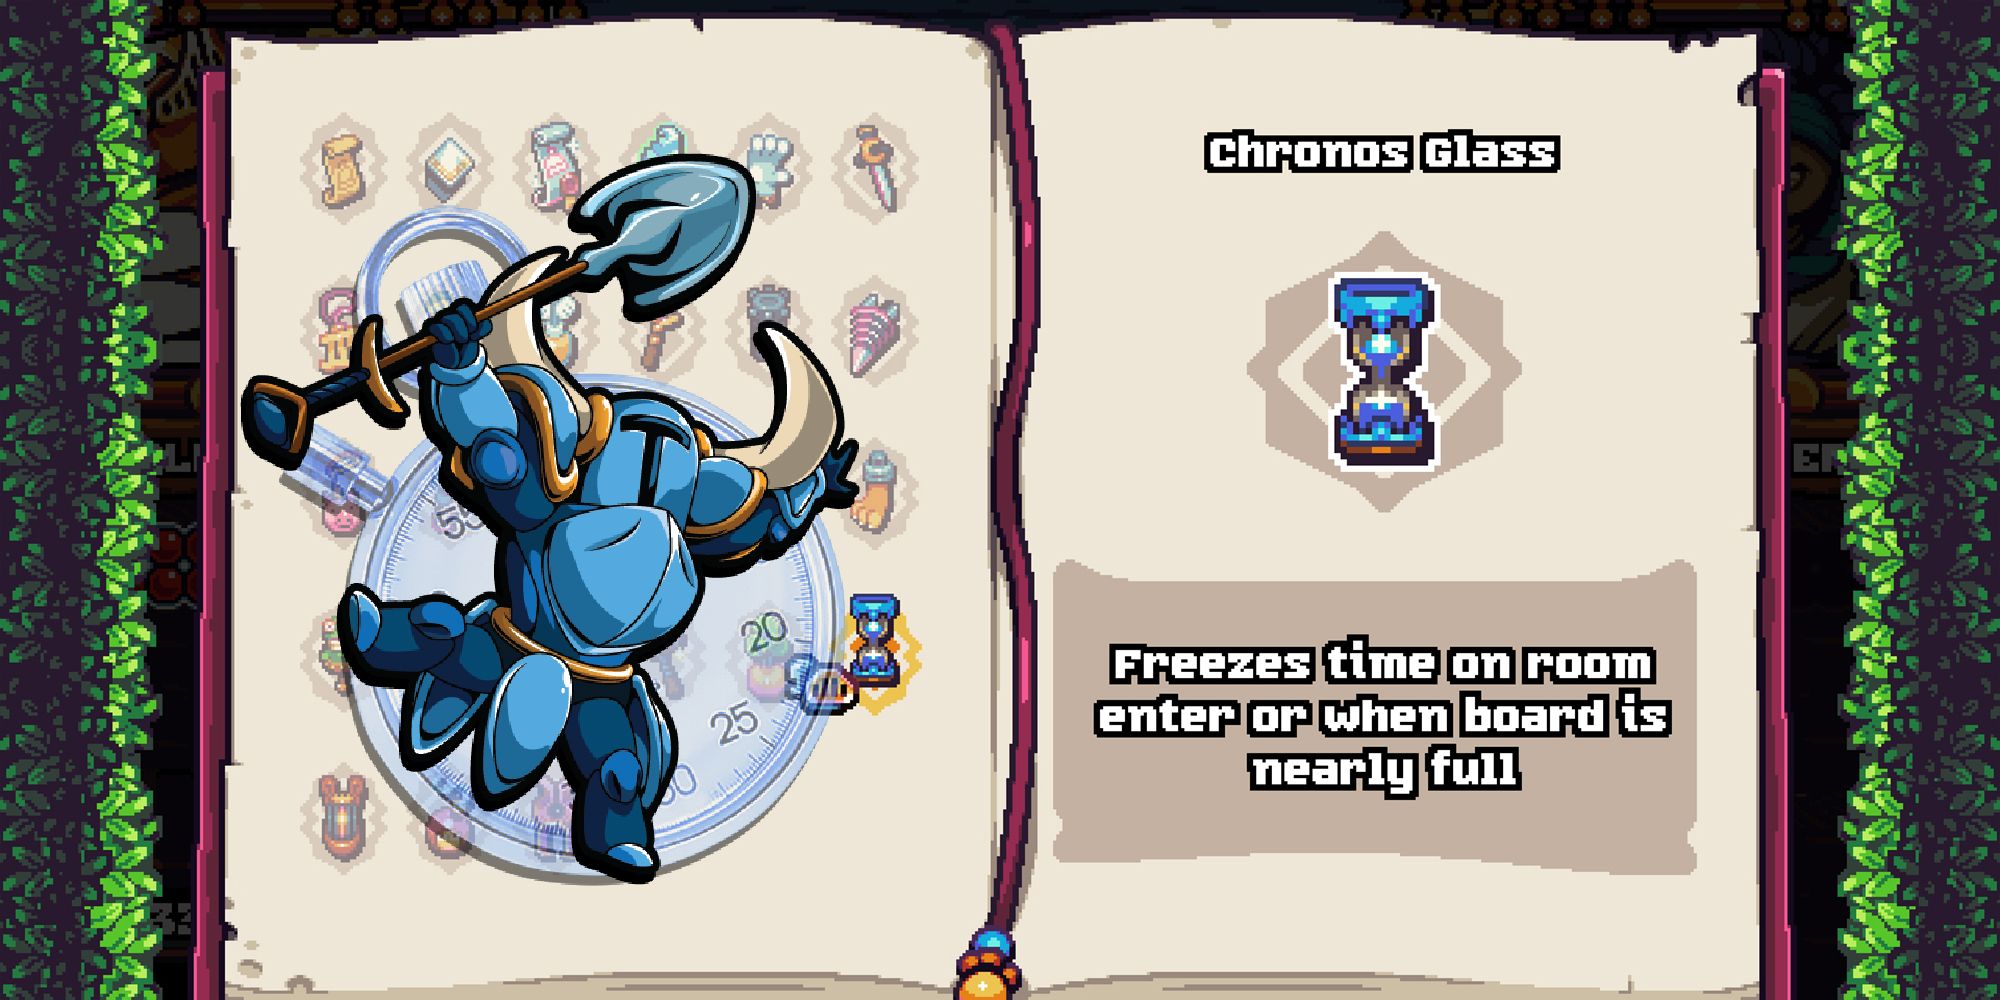 Shovel Knight Pocket Dungeon - The Chronos Glass Codex Entry With A PNG of Shovel Knight Jumping With A Frozen Clock Behind Him Overlaid On Top